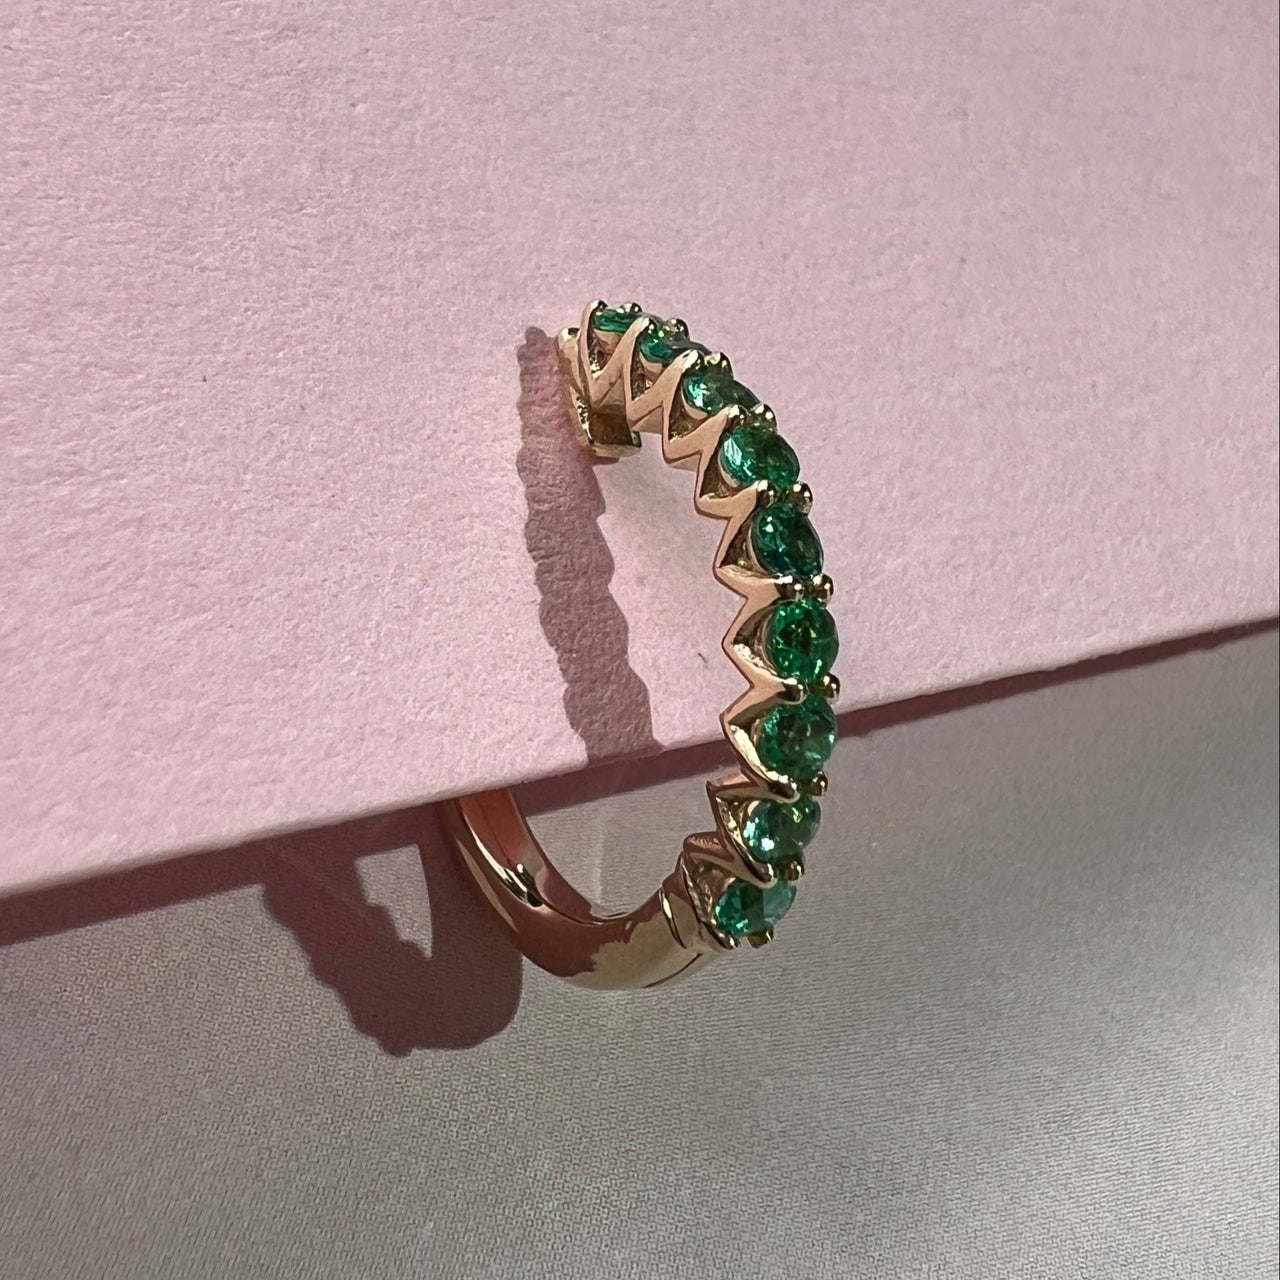 HOOP EARRING "ARCHES" WITH EMERALDS / SOLID GOLD